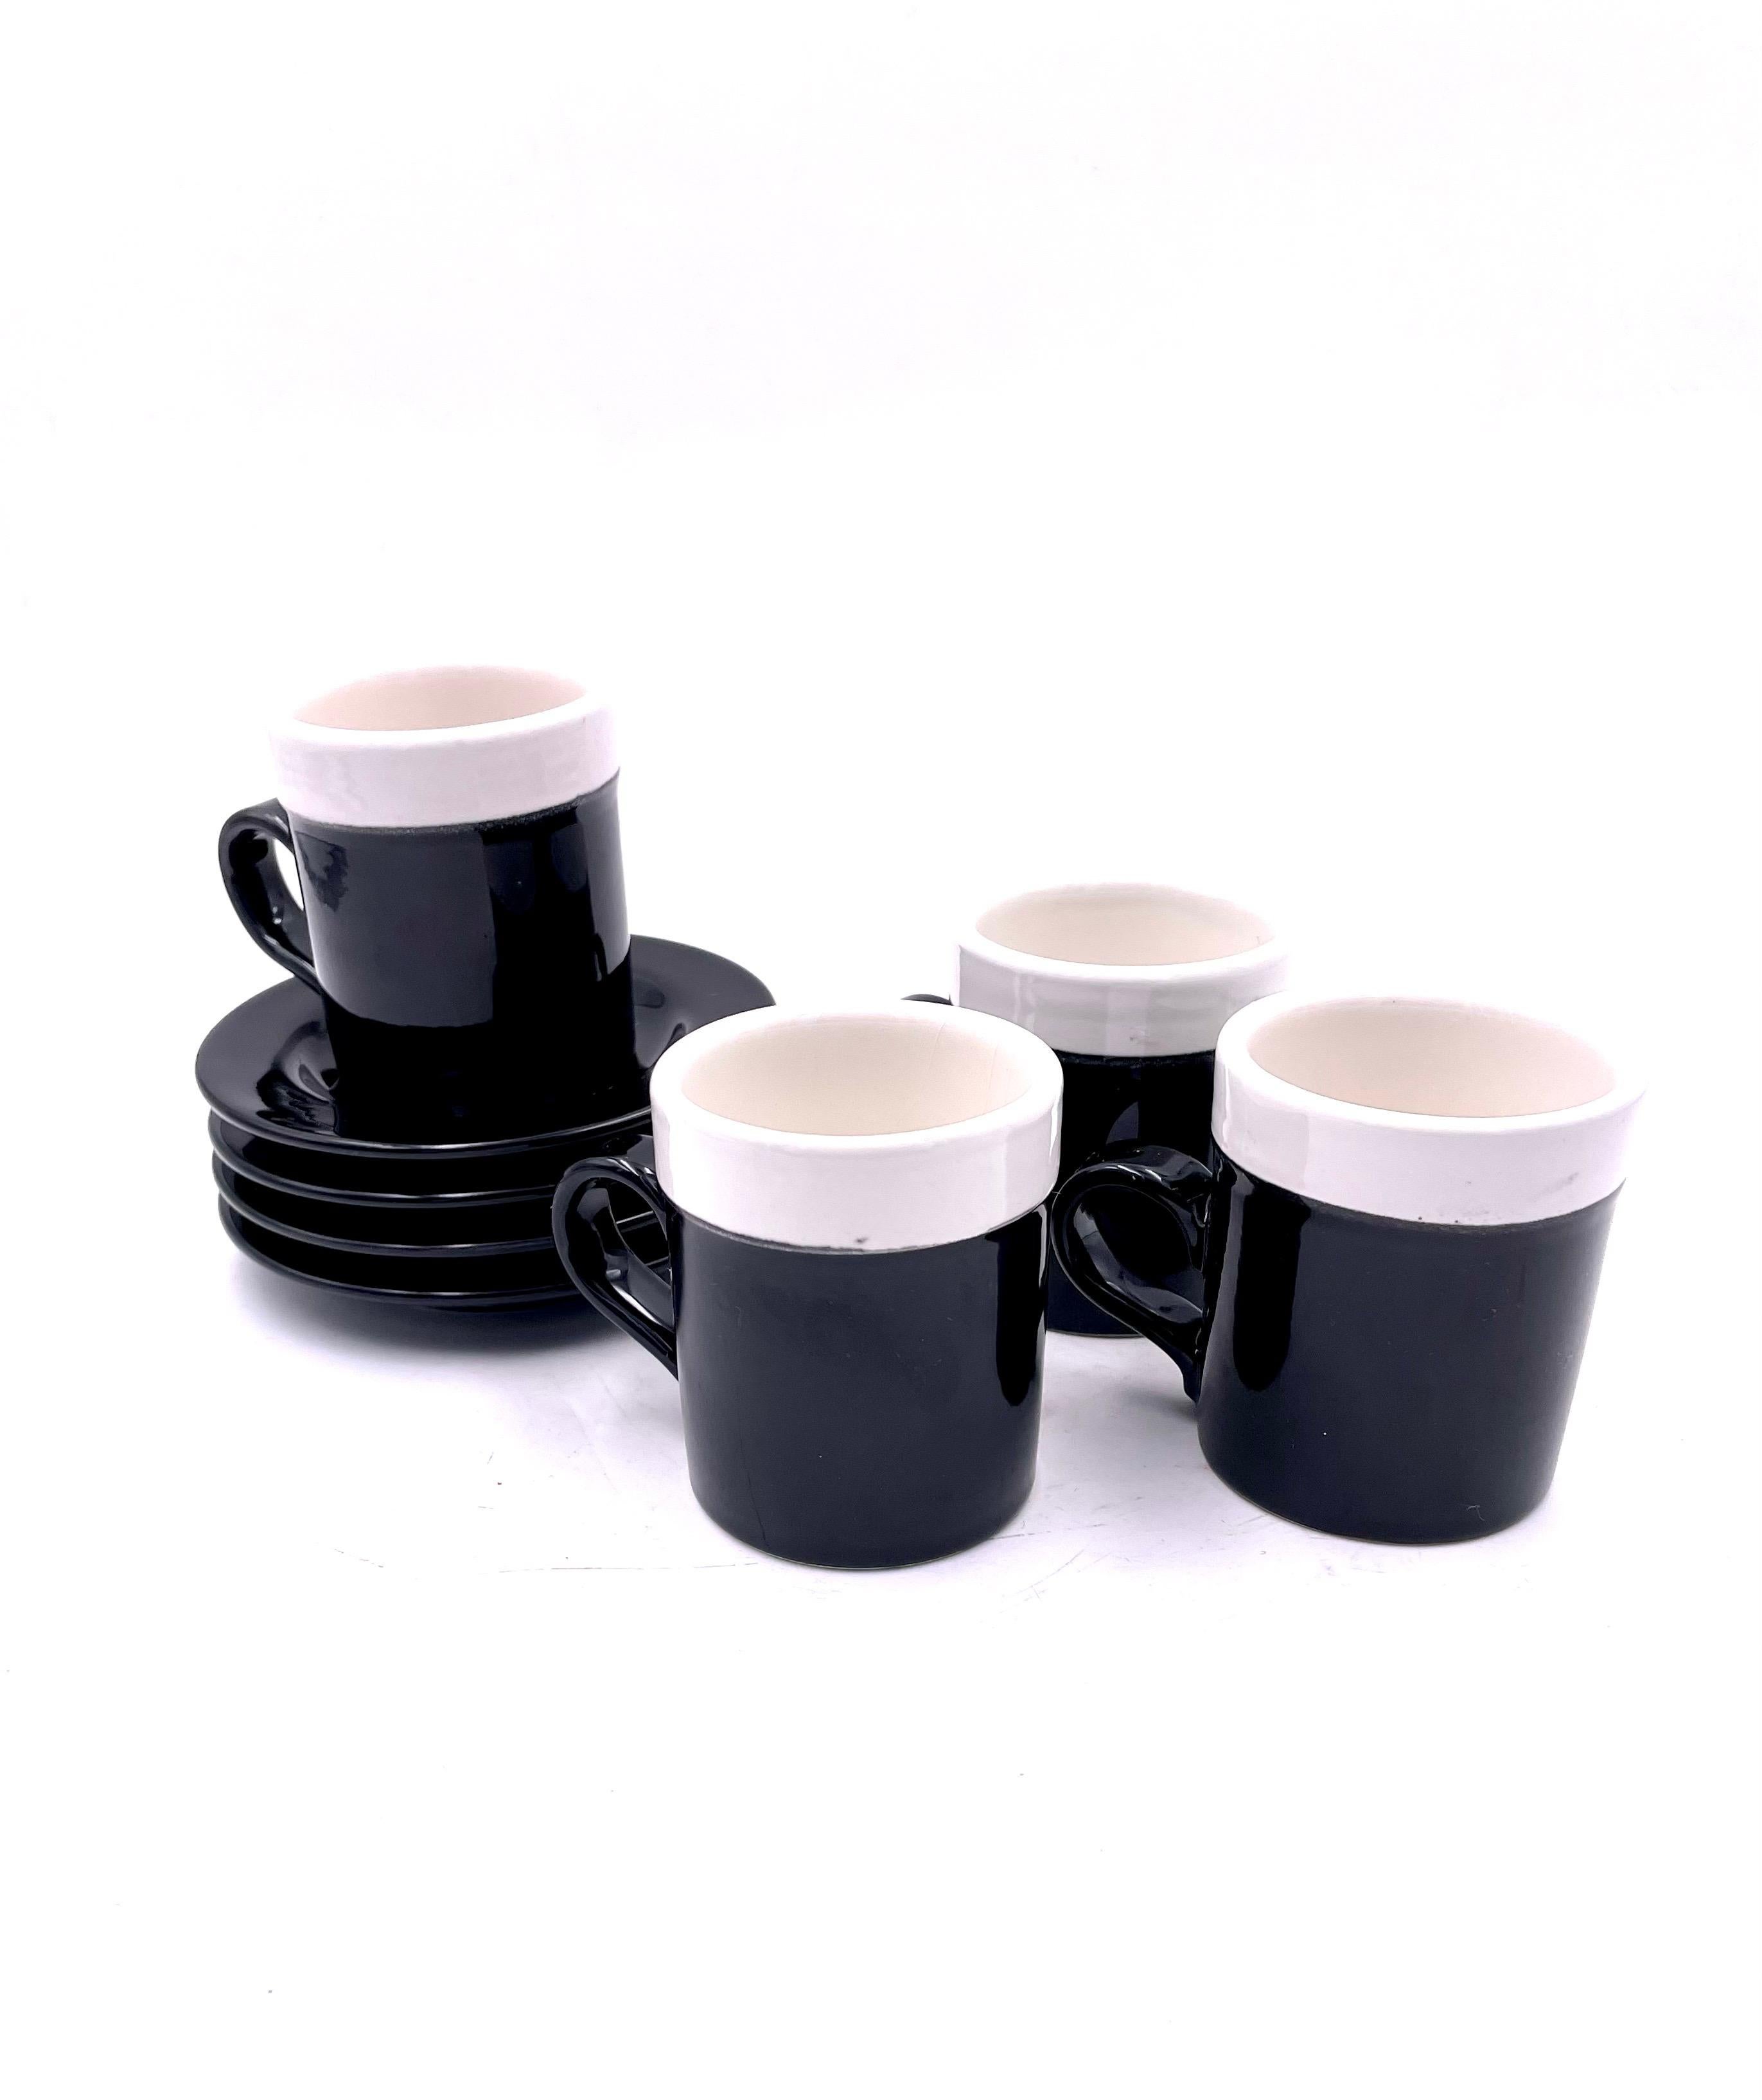 Post-Modern 1980's Postmodern Memphis Era Set of 4 espresso Cups & Saucers by Baldelli Italy For Sale